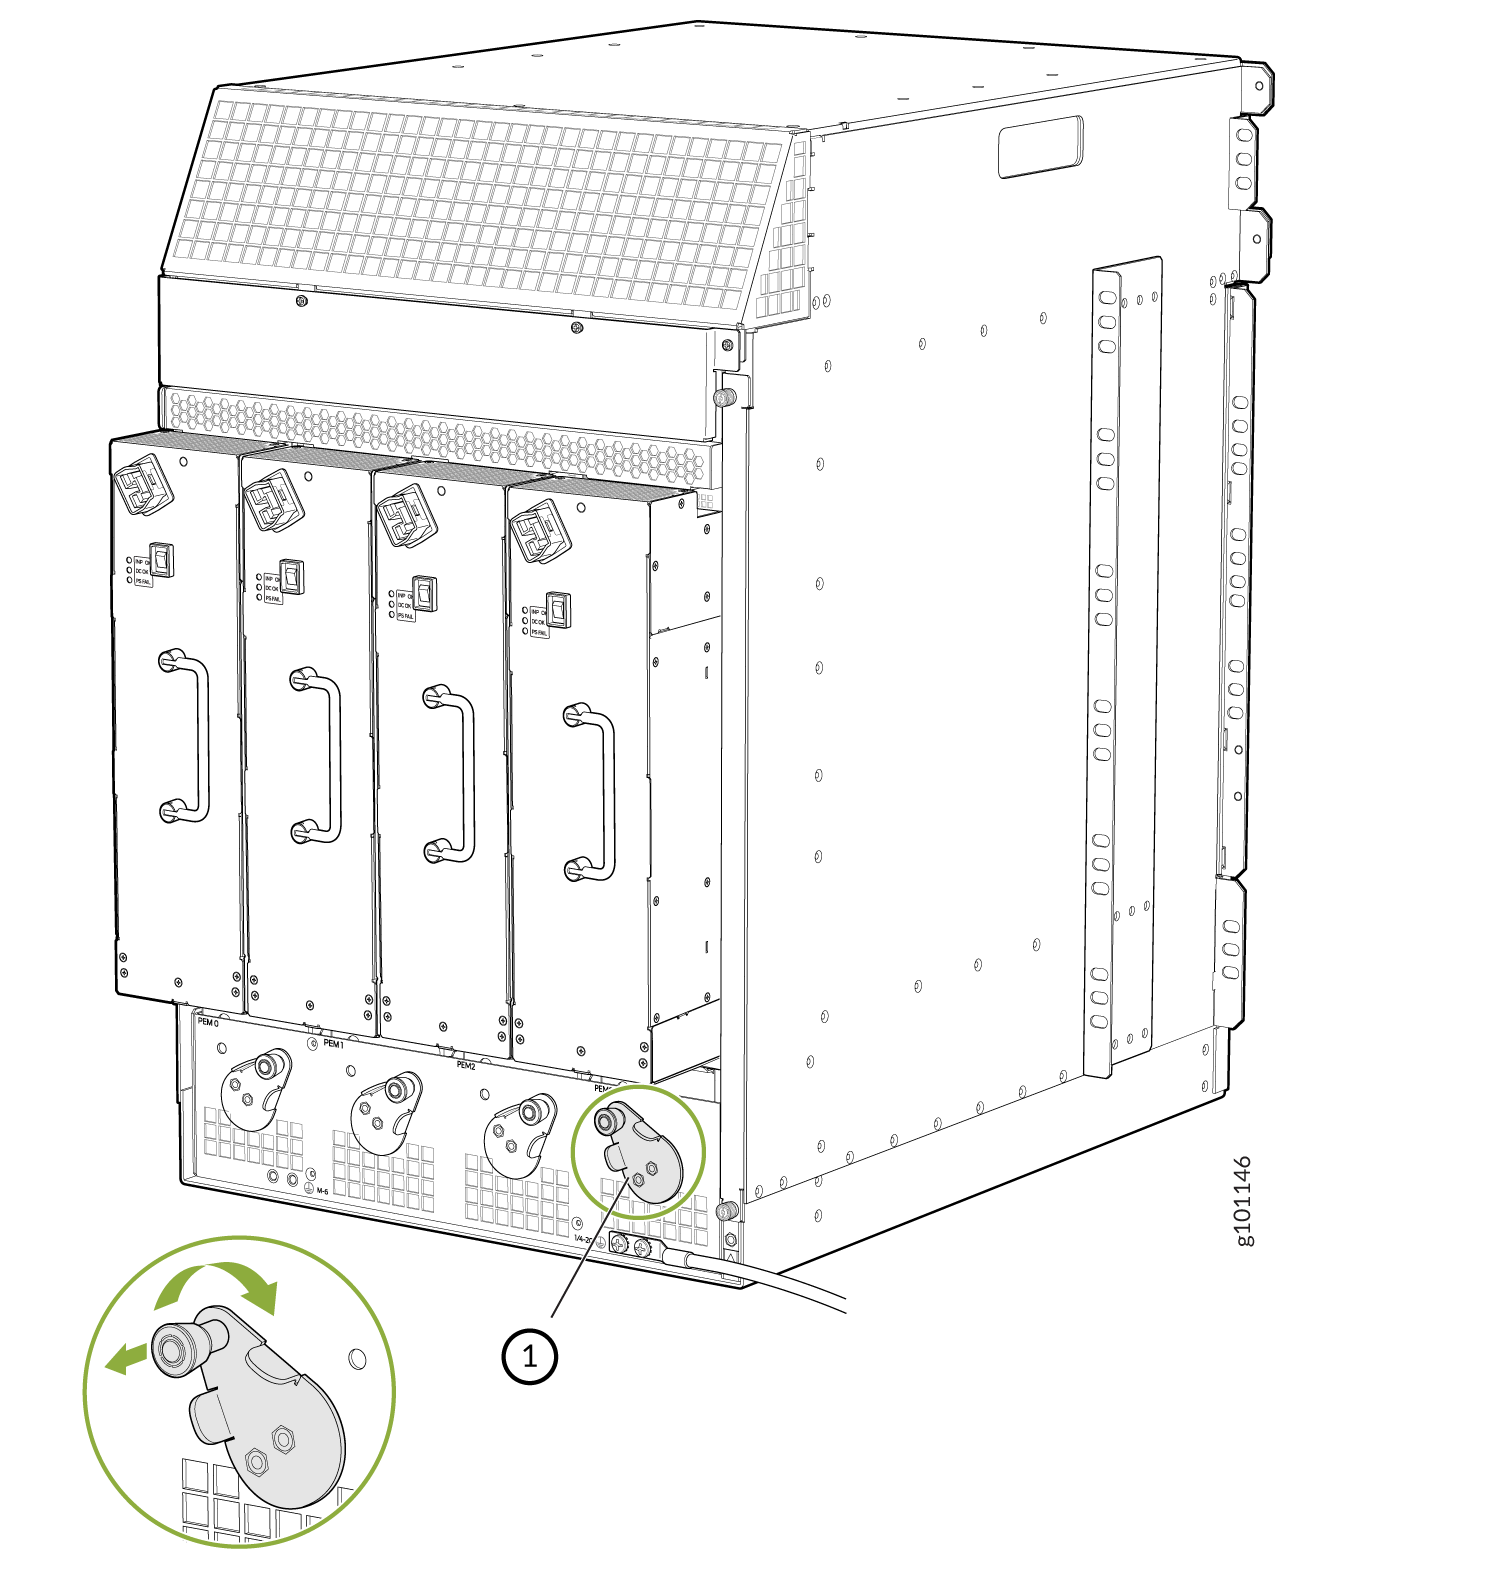 MX960 with High-Voltage Second Generation Power Supplies Installed